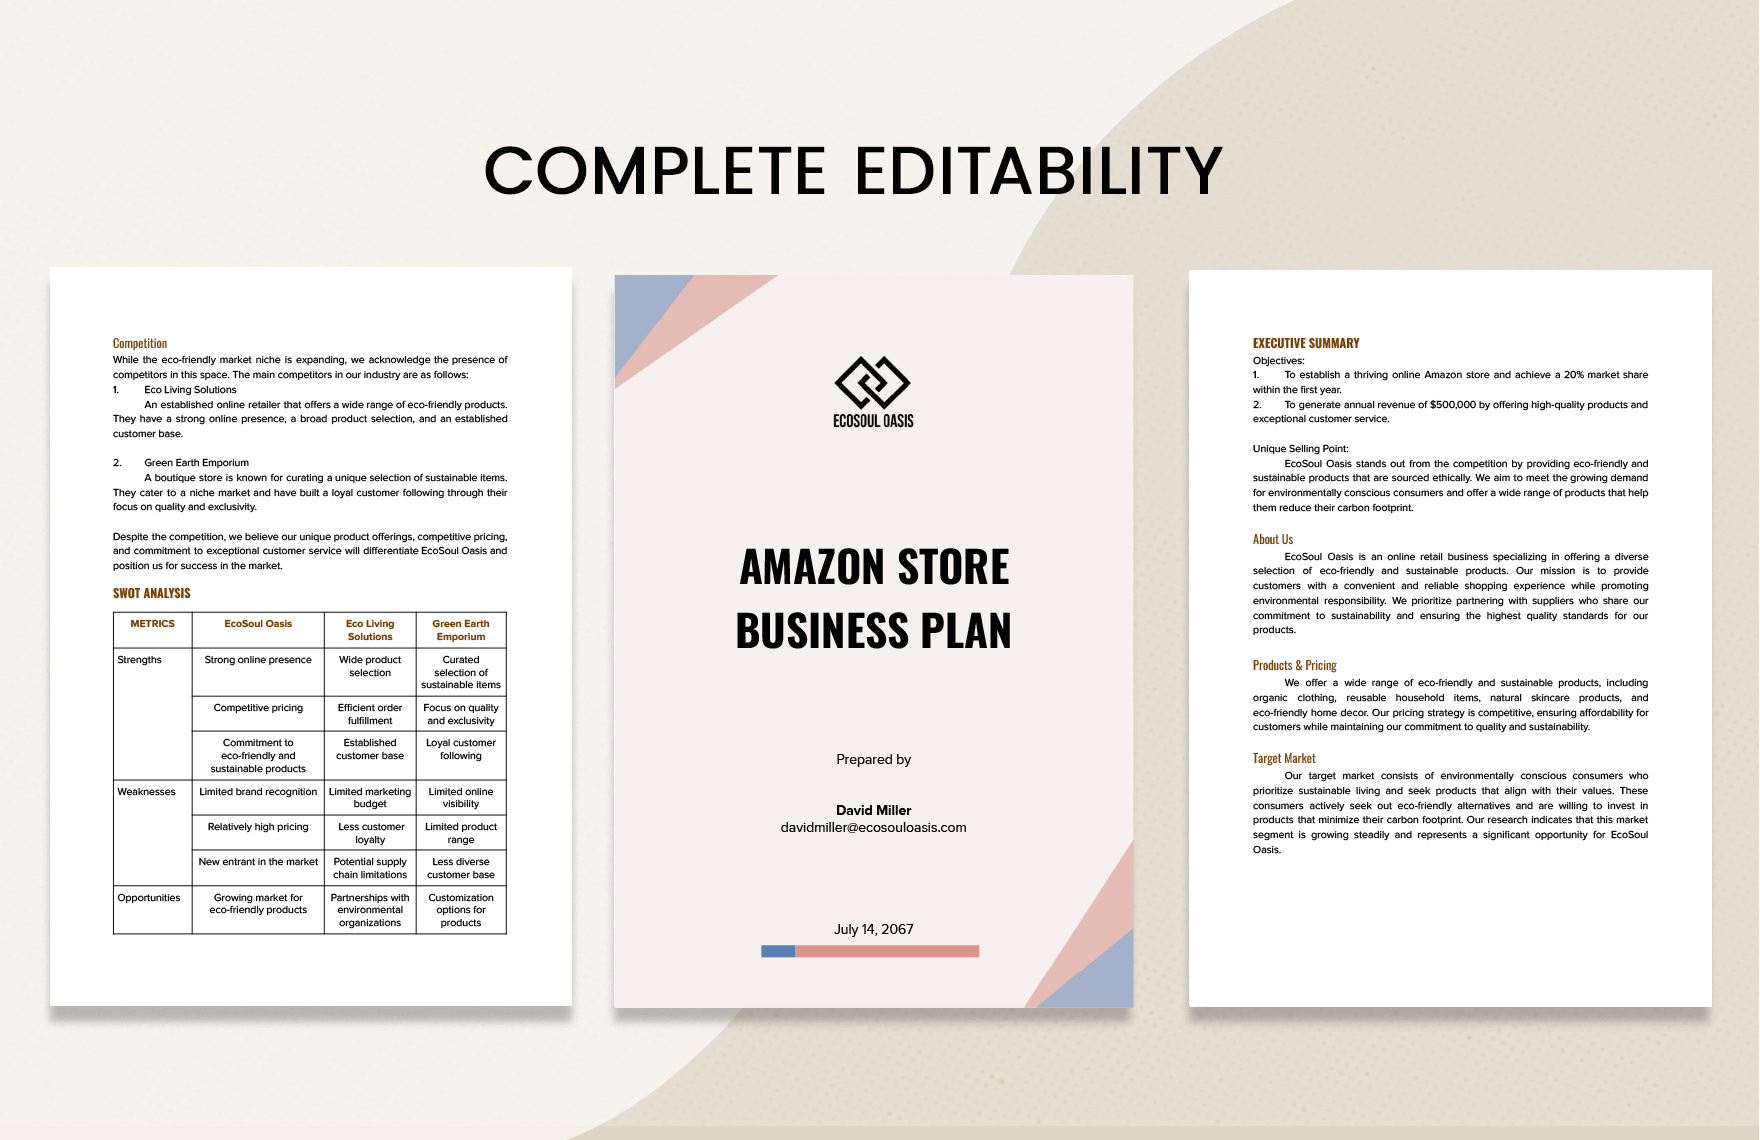 Amazon Store Business Plan Template